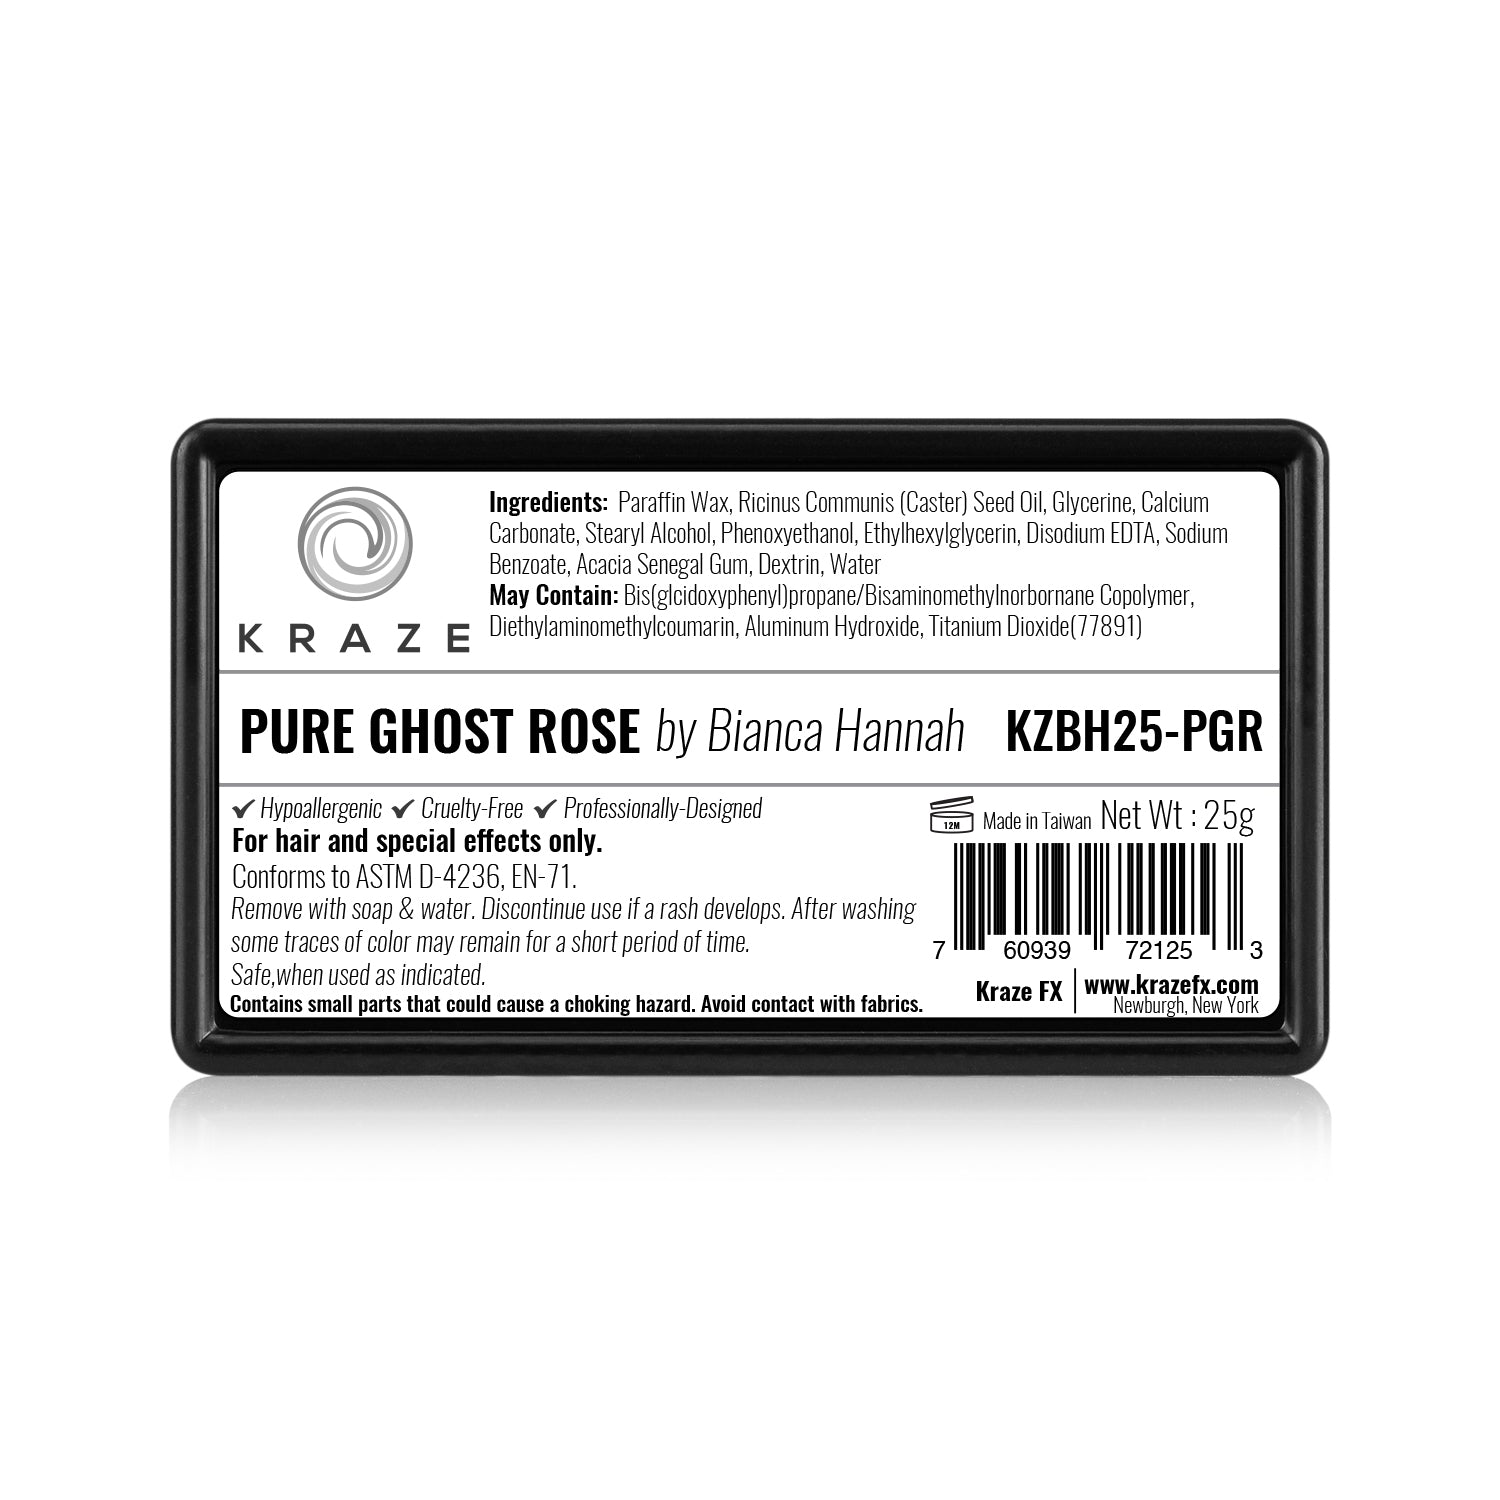 Kraze FX Dome Stroke - Pure Ghost Rose by Bianca Hannah (25 gm)